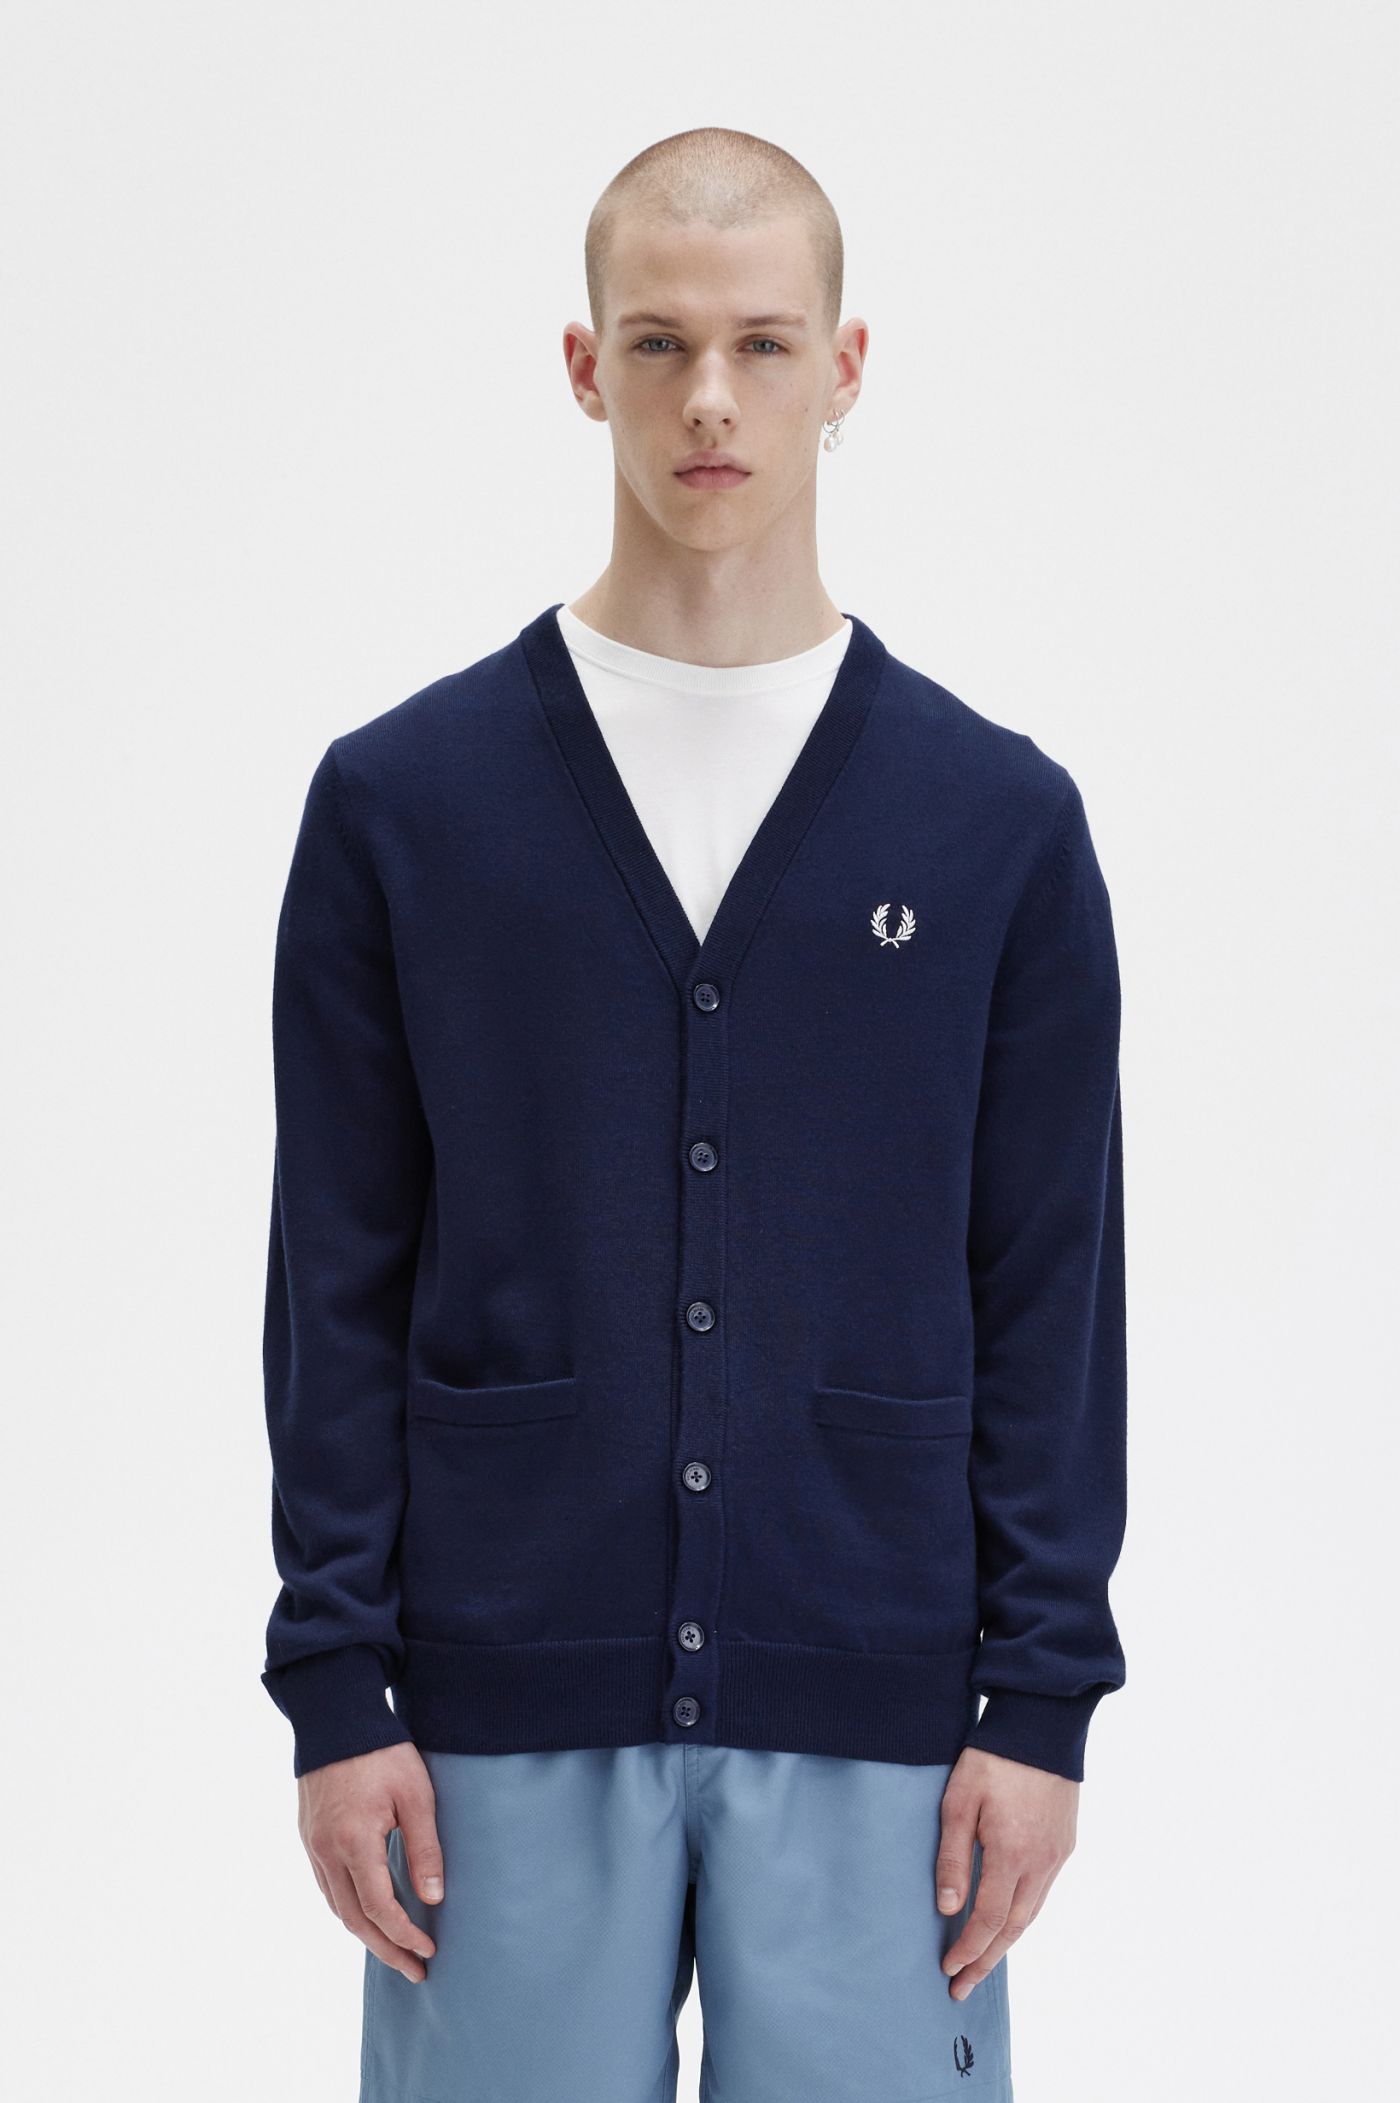 Classic Cardigan - Navy | Men's Knitwear Jumpers, Cardigans & Sweaters | Fred Perry US